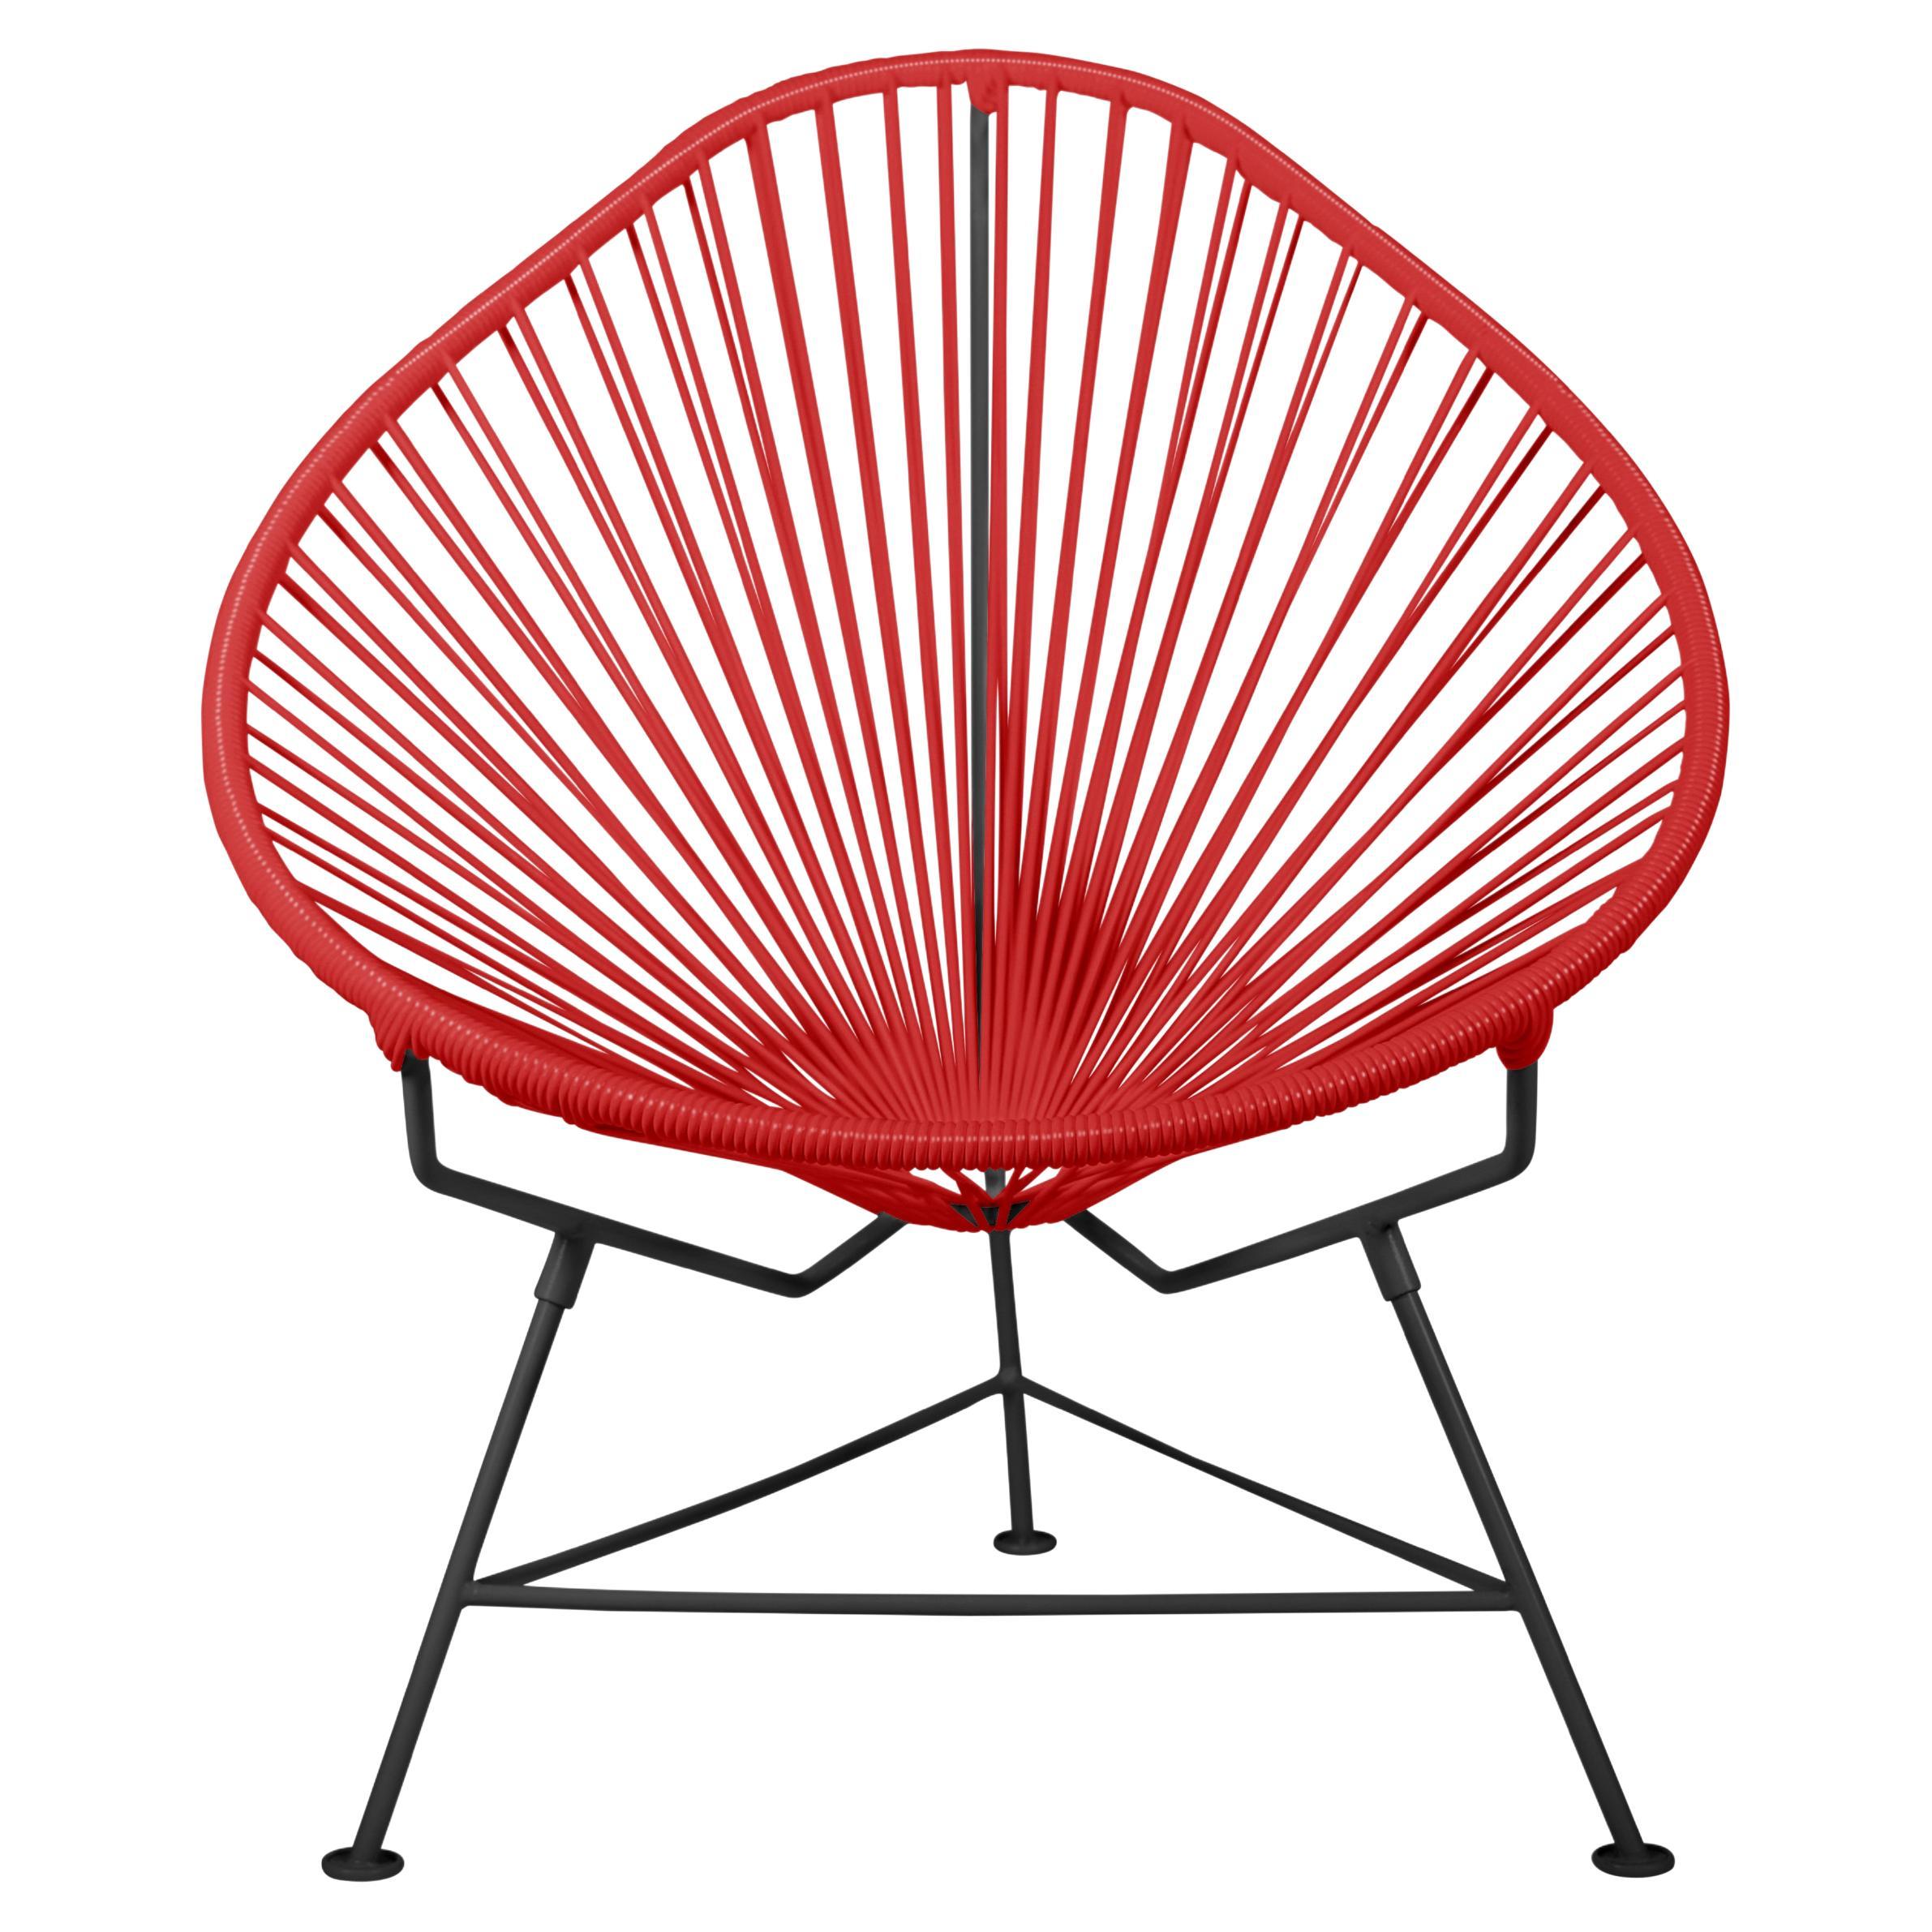 Innit Designs Acapulco Chair Red Weave on Black Frame